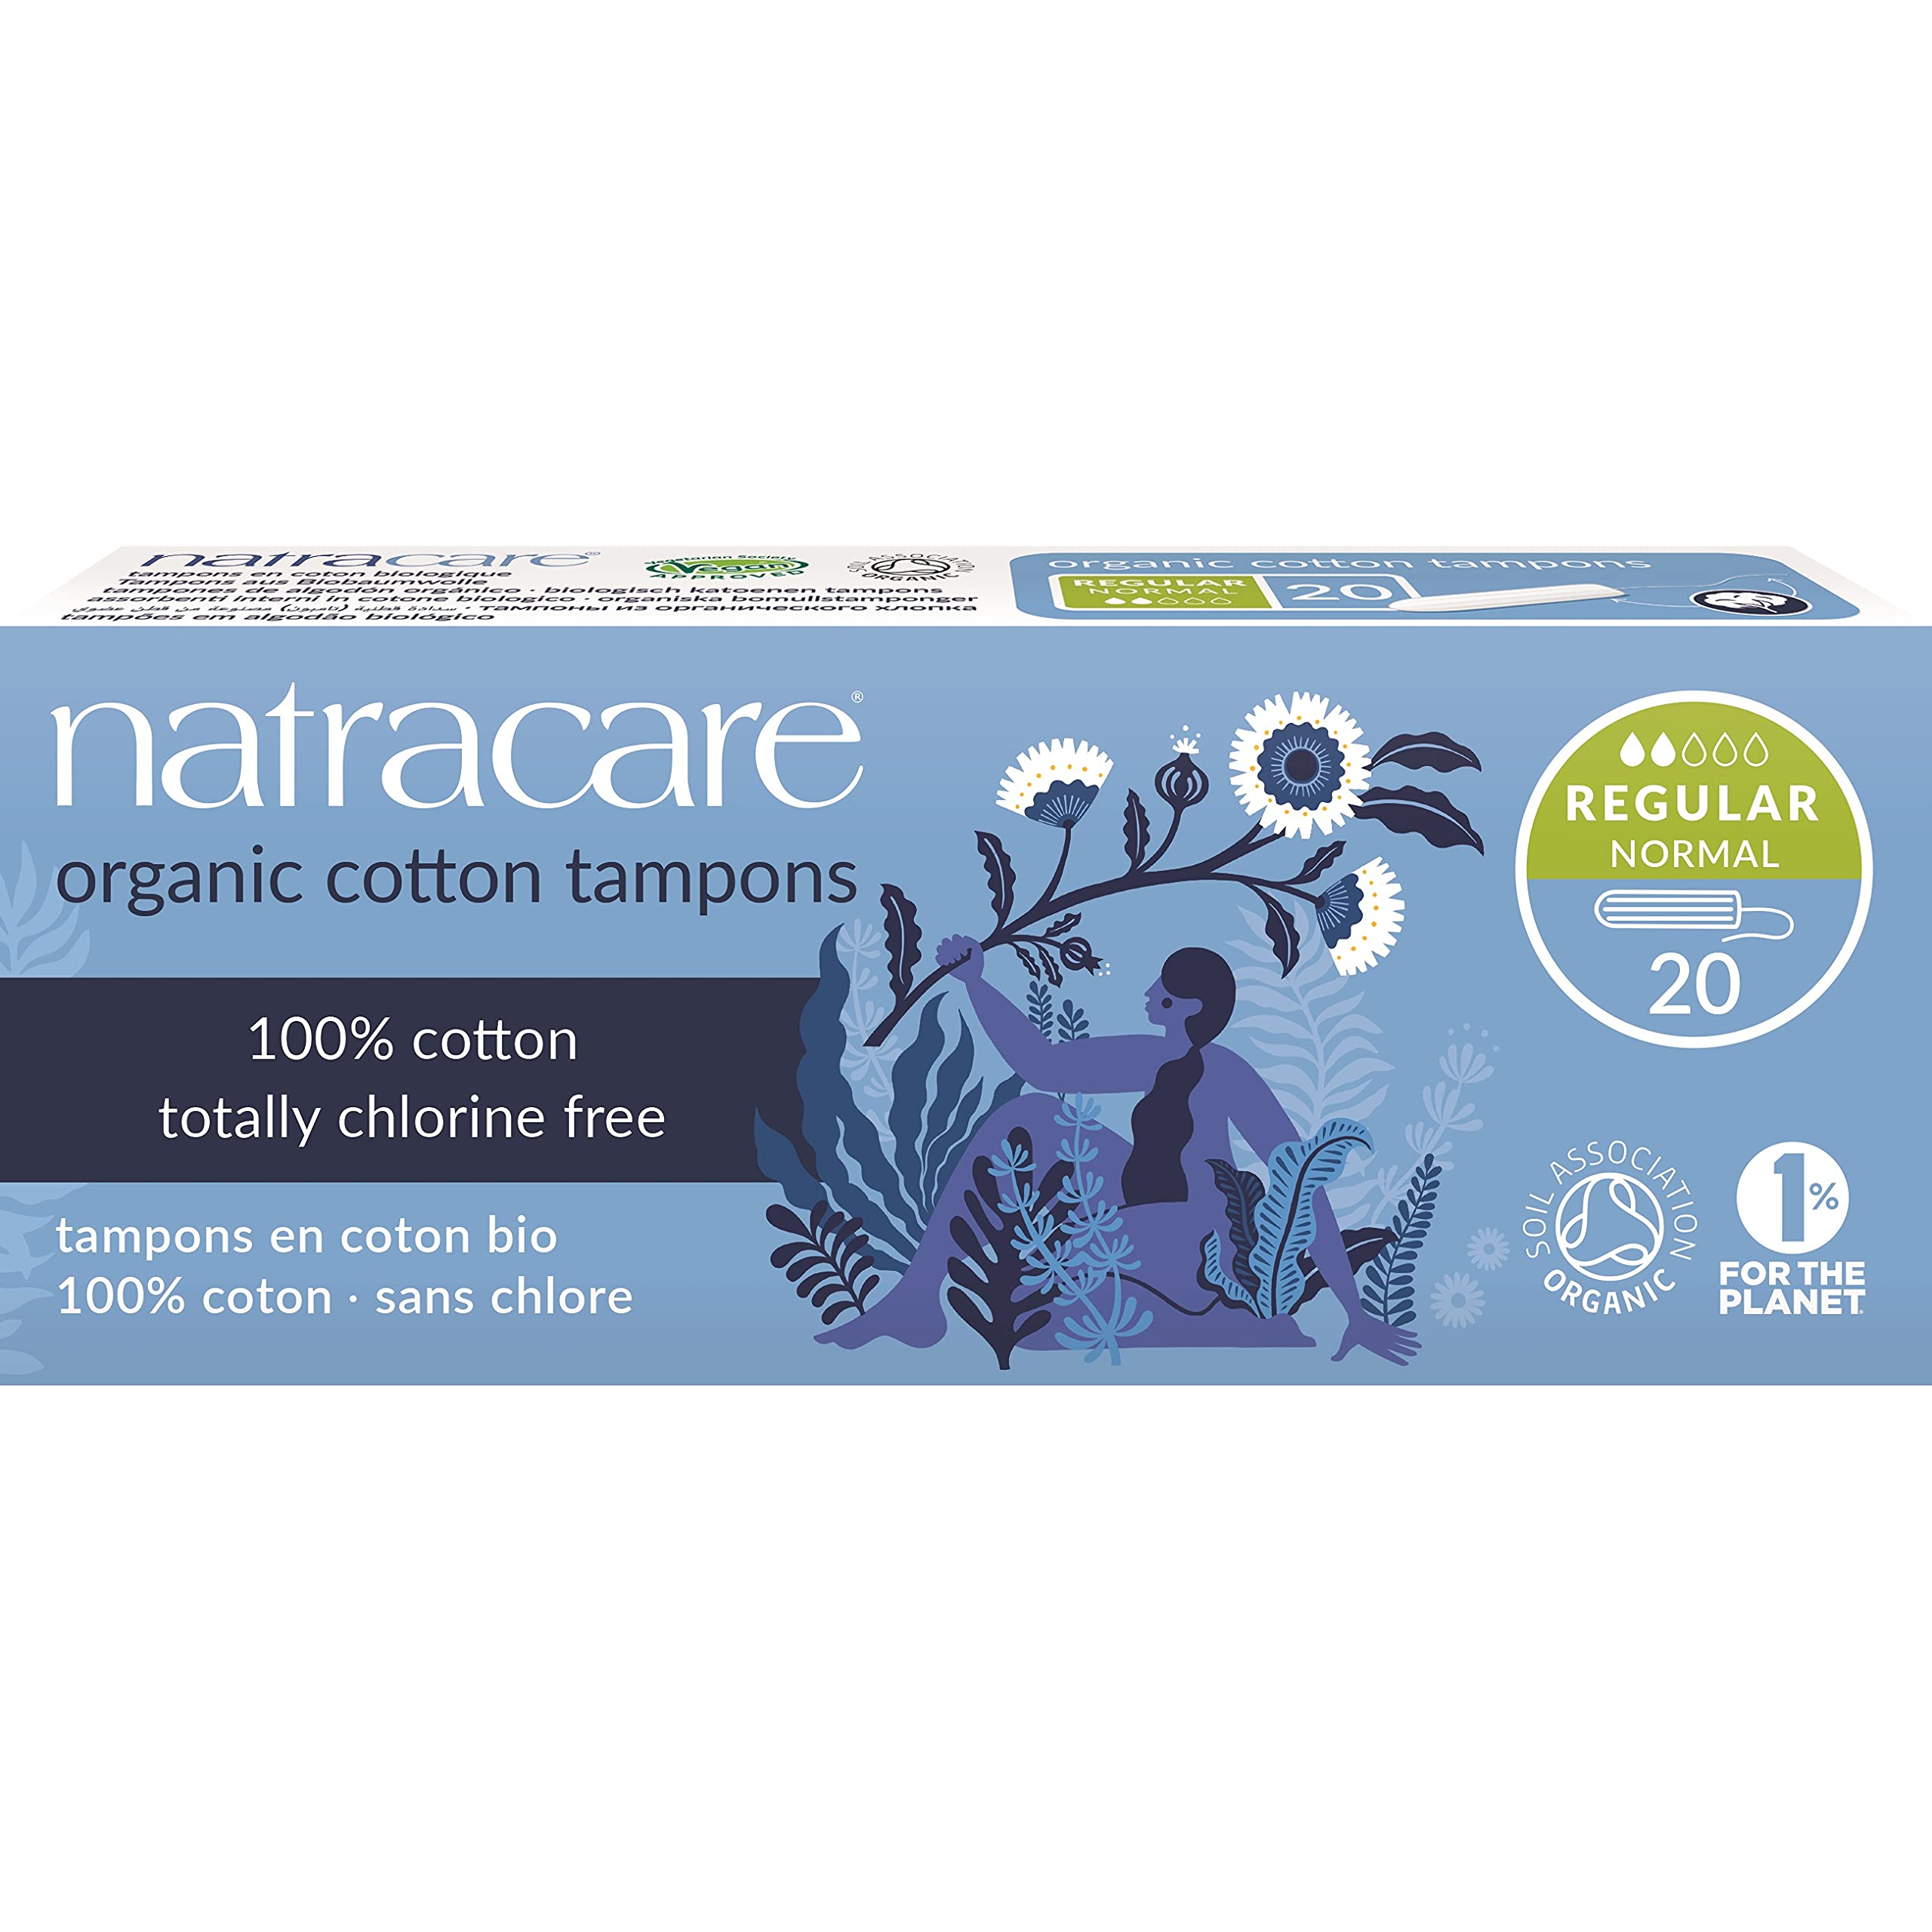 Natracare Non-Applicator 100% Organic Cotton Tampons, Regular, Totally Chlorine Free, Biodegradable and Compostable (12 Pack, 240 Tampons Total)